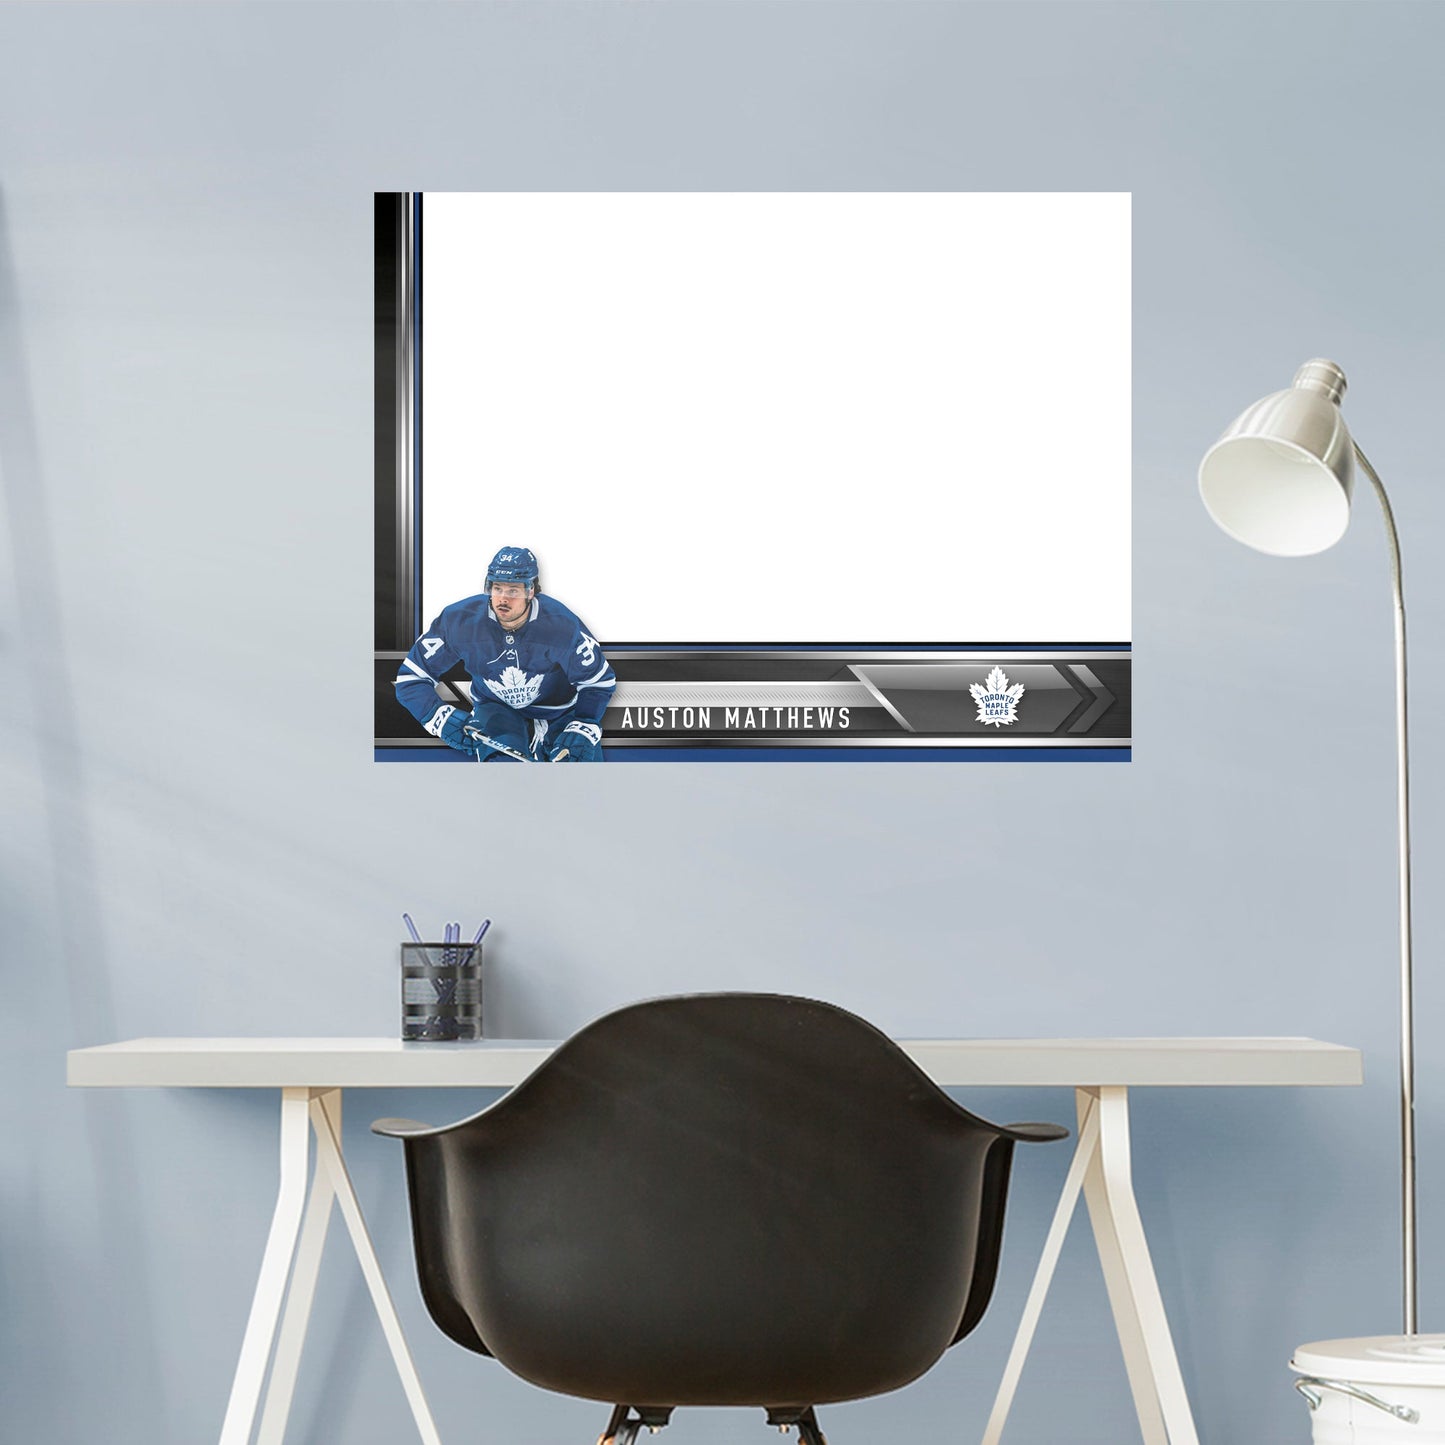 Toronto Maple Leafs: Auston Matthews Dry Erase Whiteboard - Officially Licensed NHL Removable Adhesive Decal